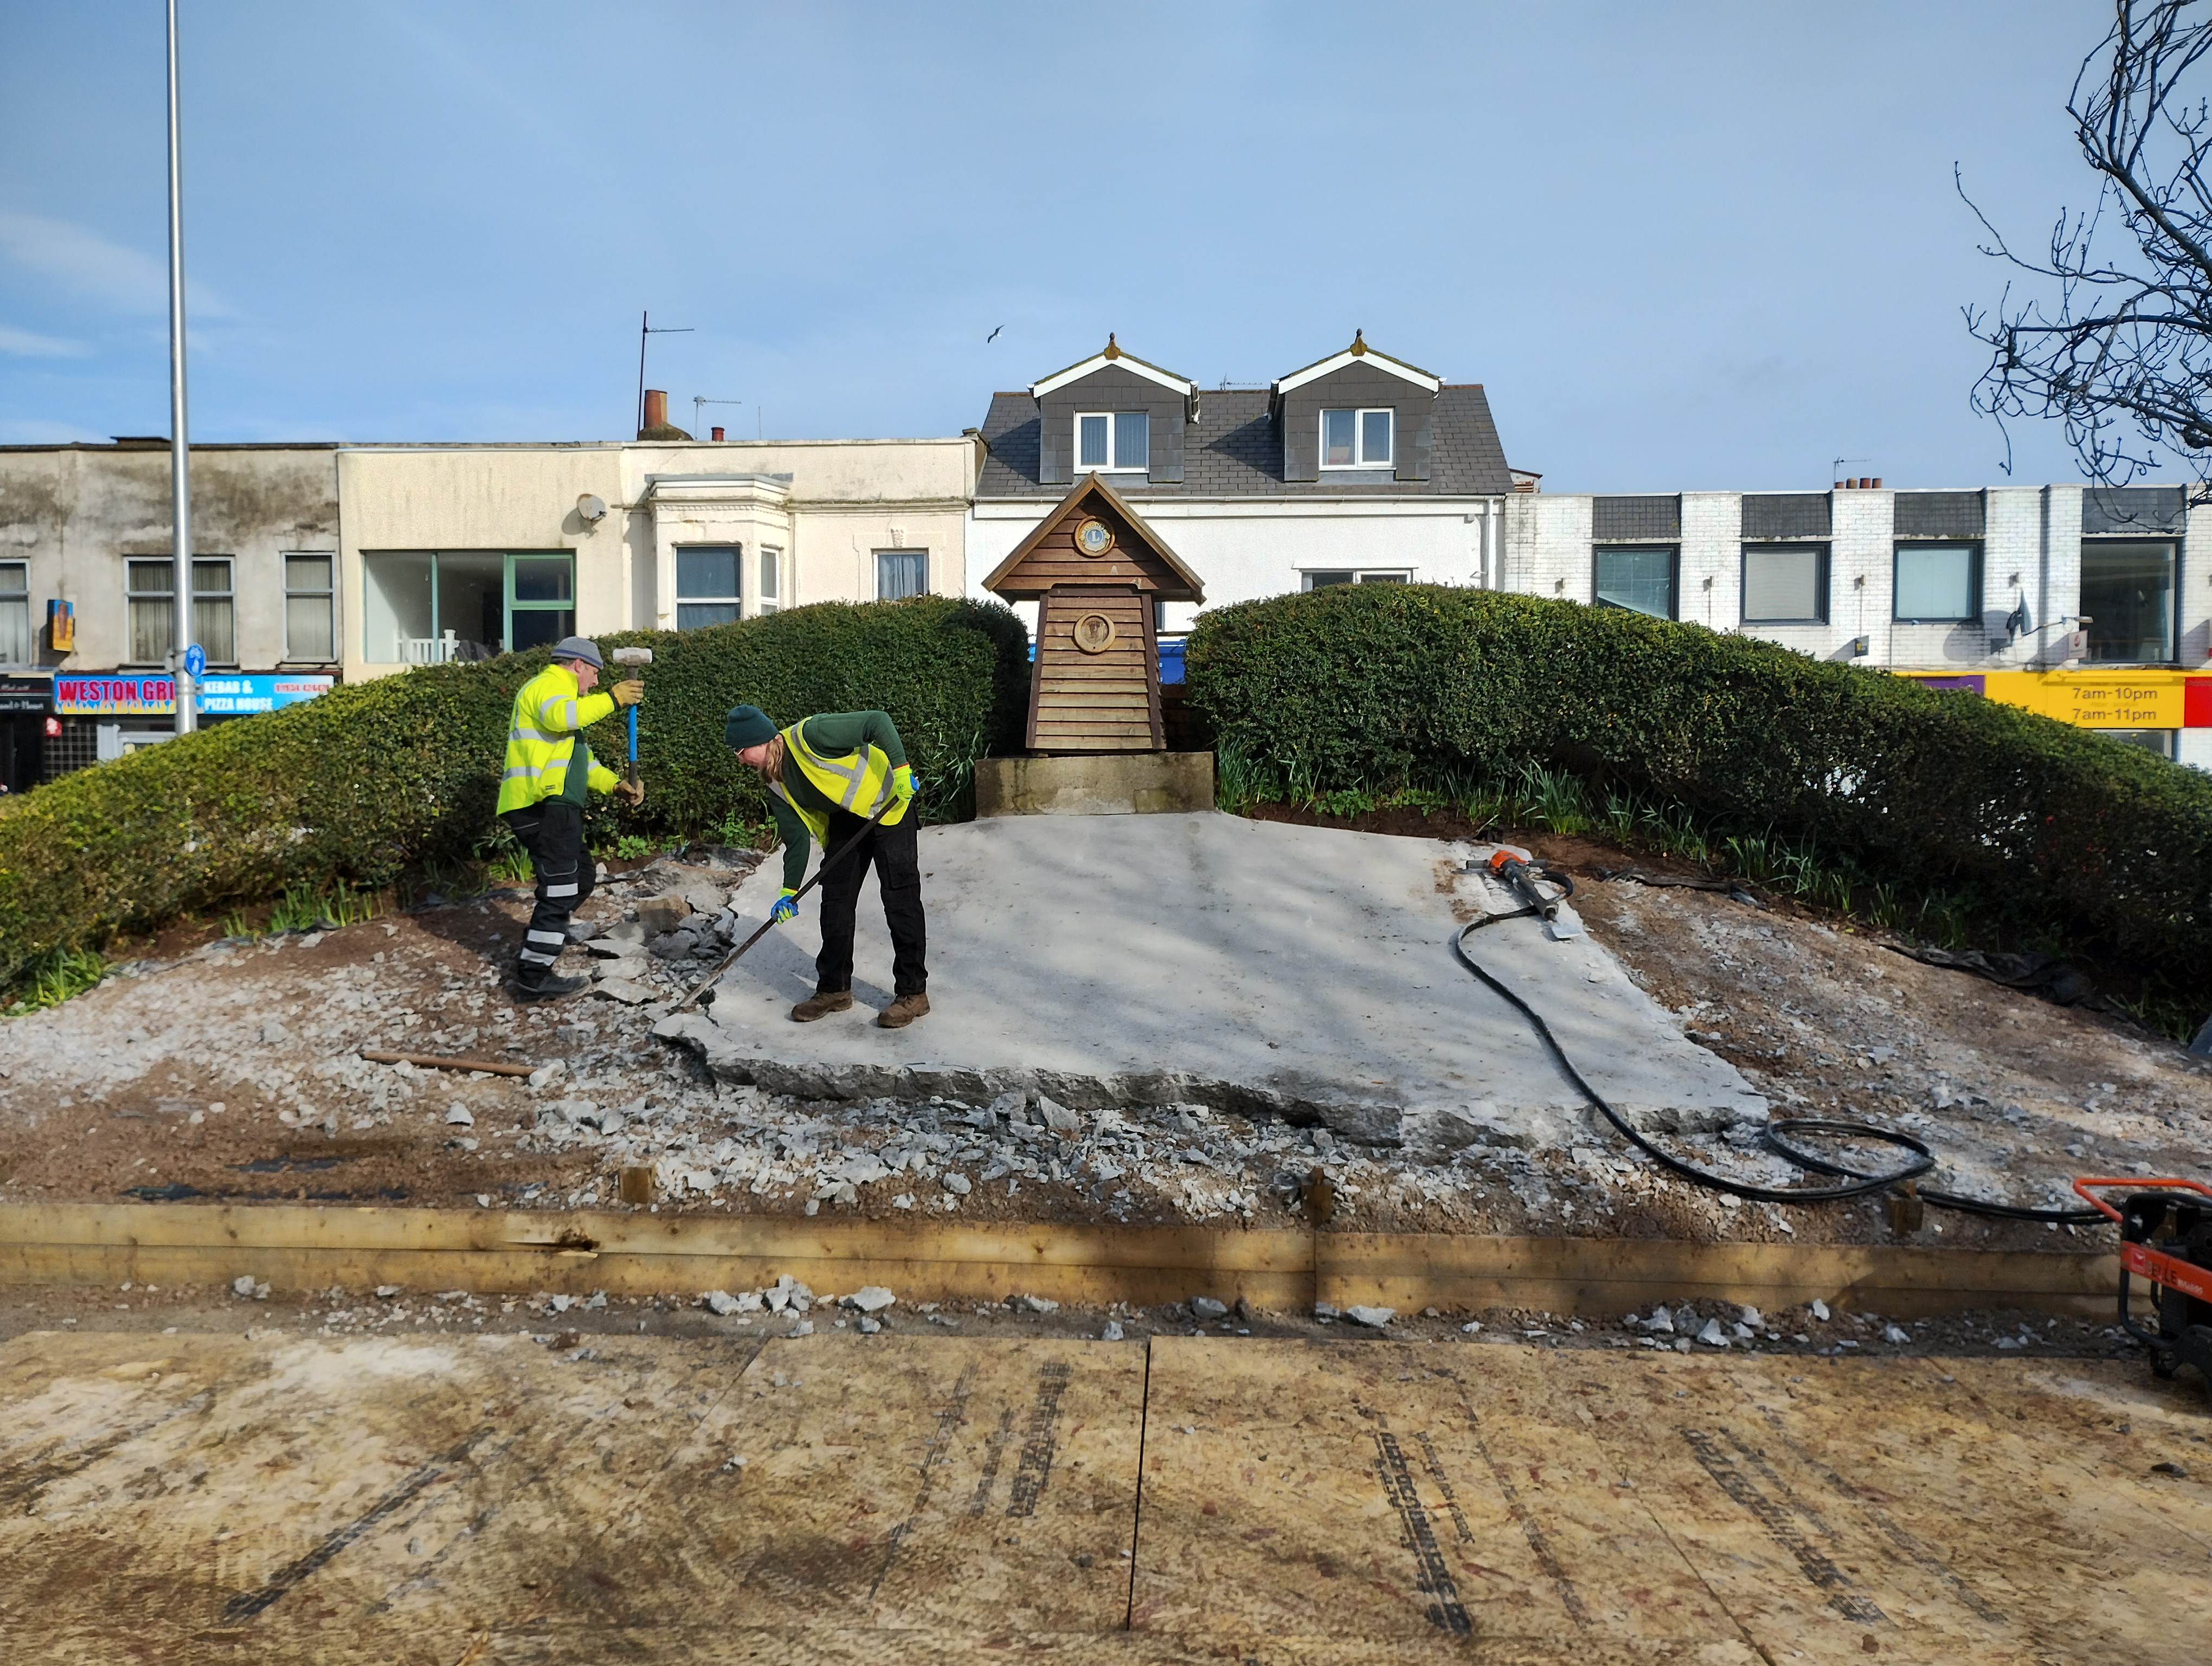 North Somerset Council takes first step in restoring Weston-super-Mare floral clock 